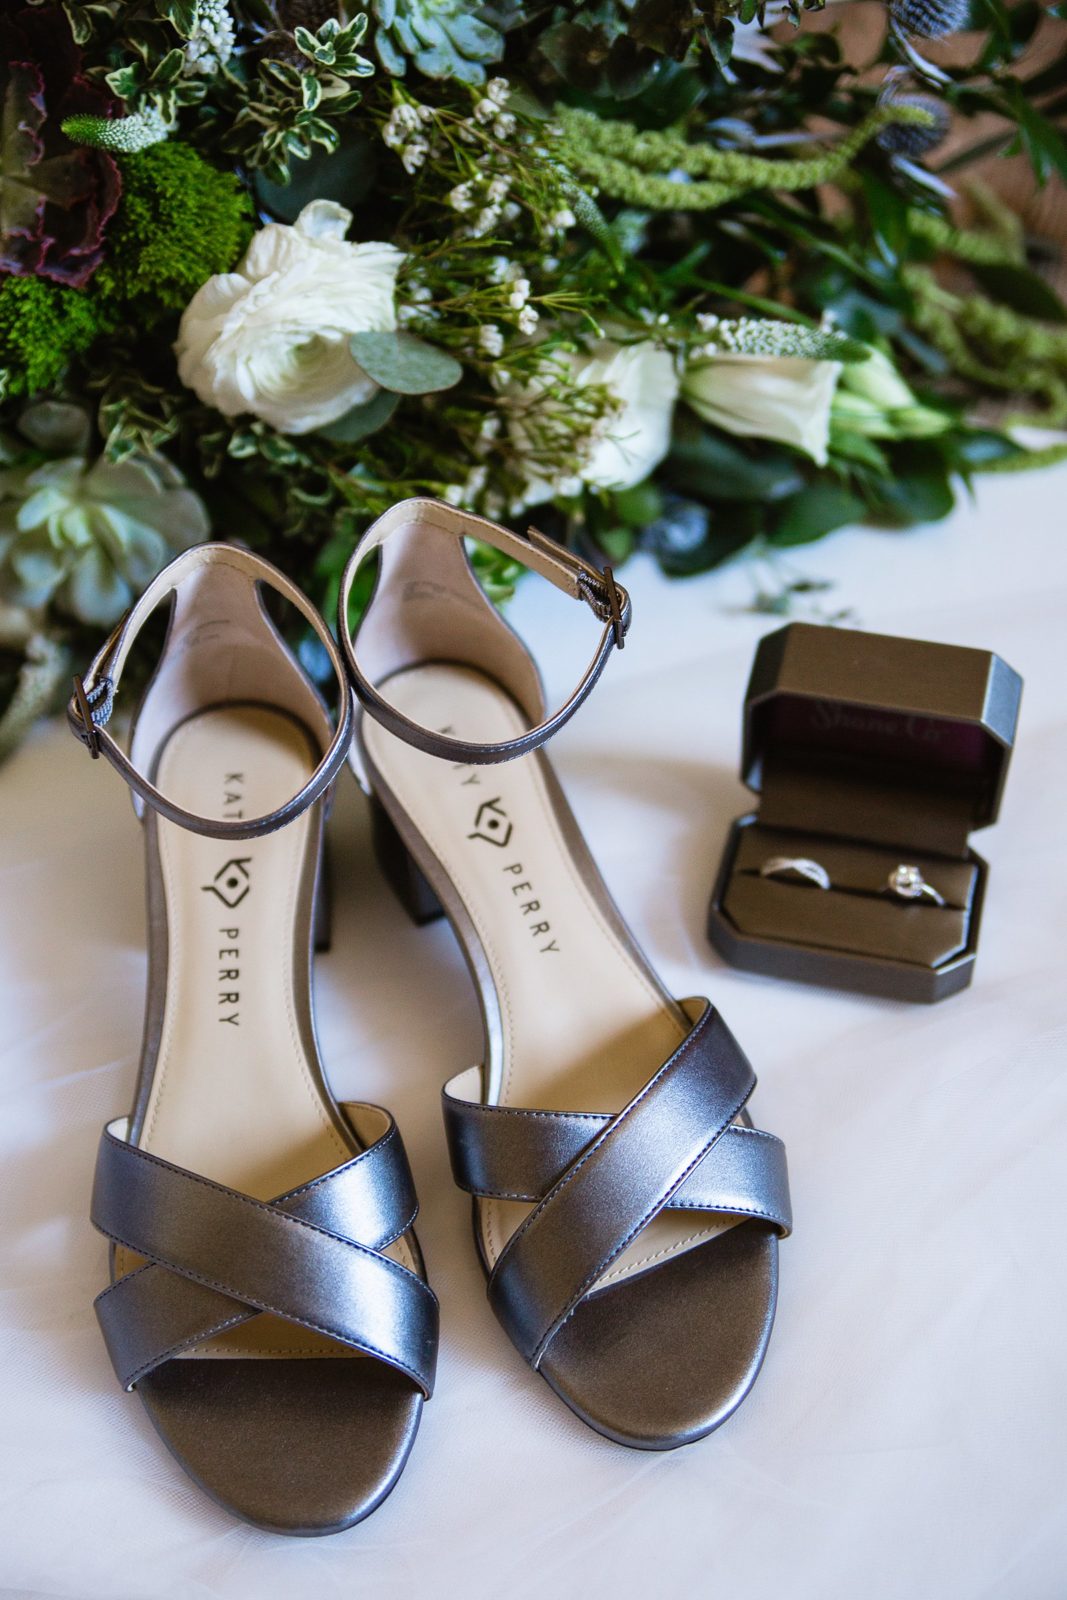 Brides's wedding day details of silver shoes, garden bouquet, and wedding band by PMA Photography.